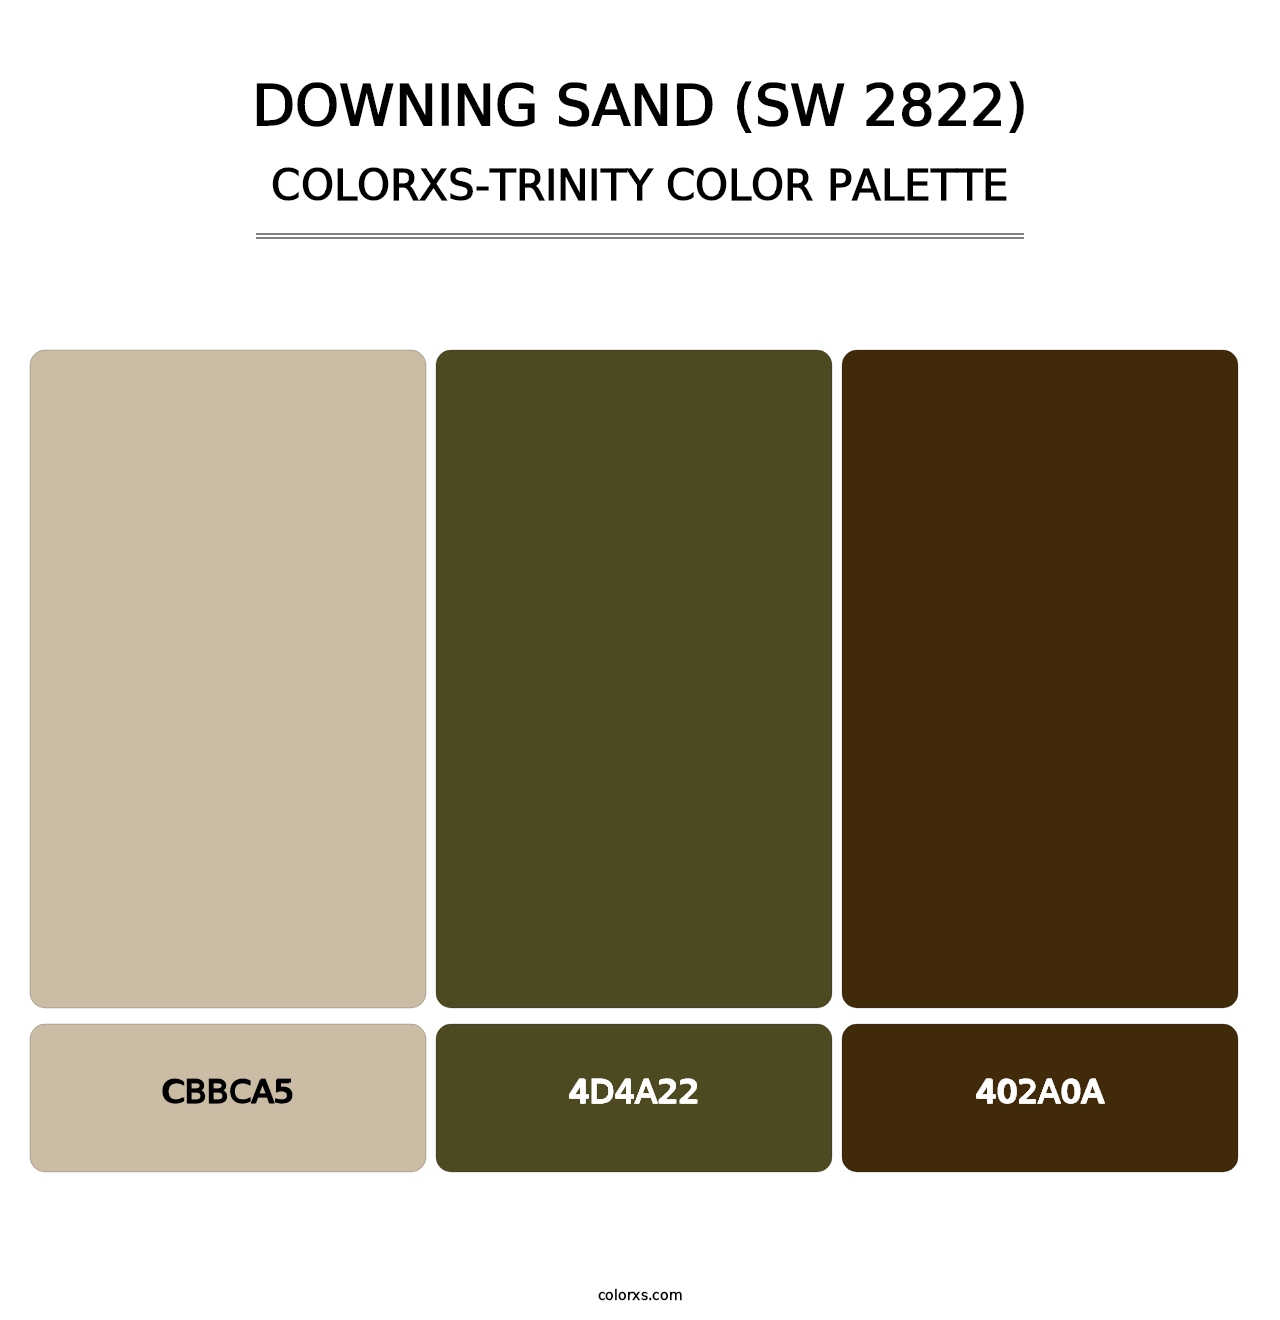 Downing Sand (SW 2822) - Colorxs Trinity Palette